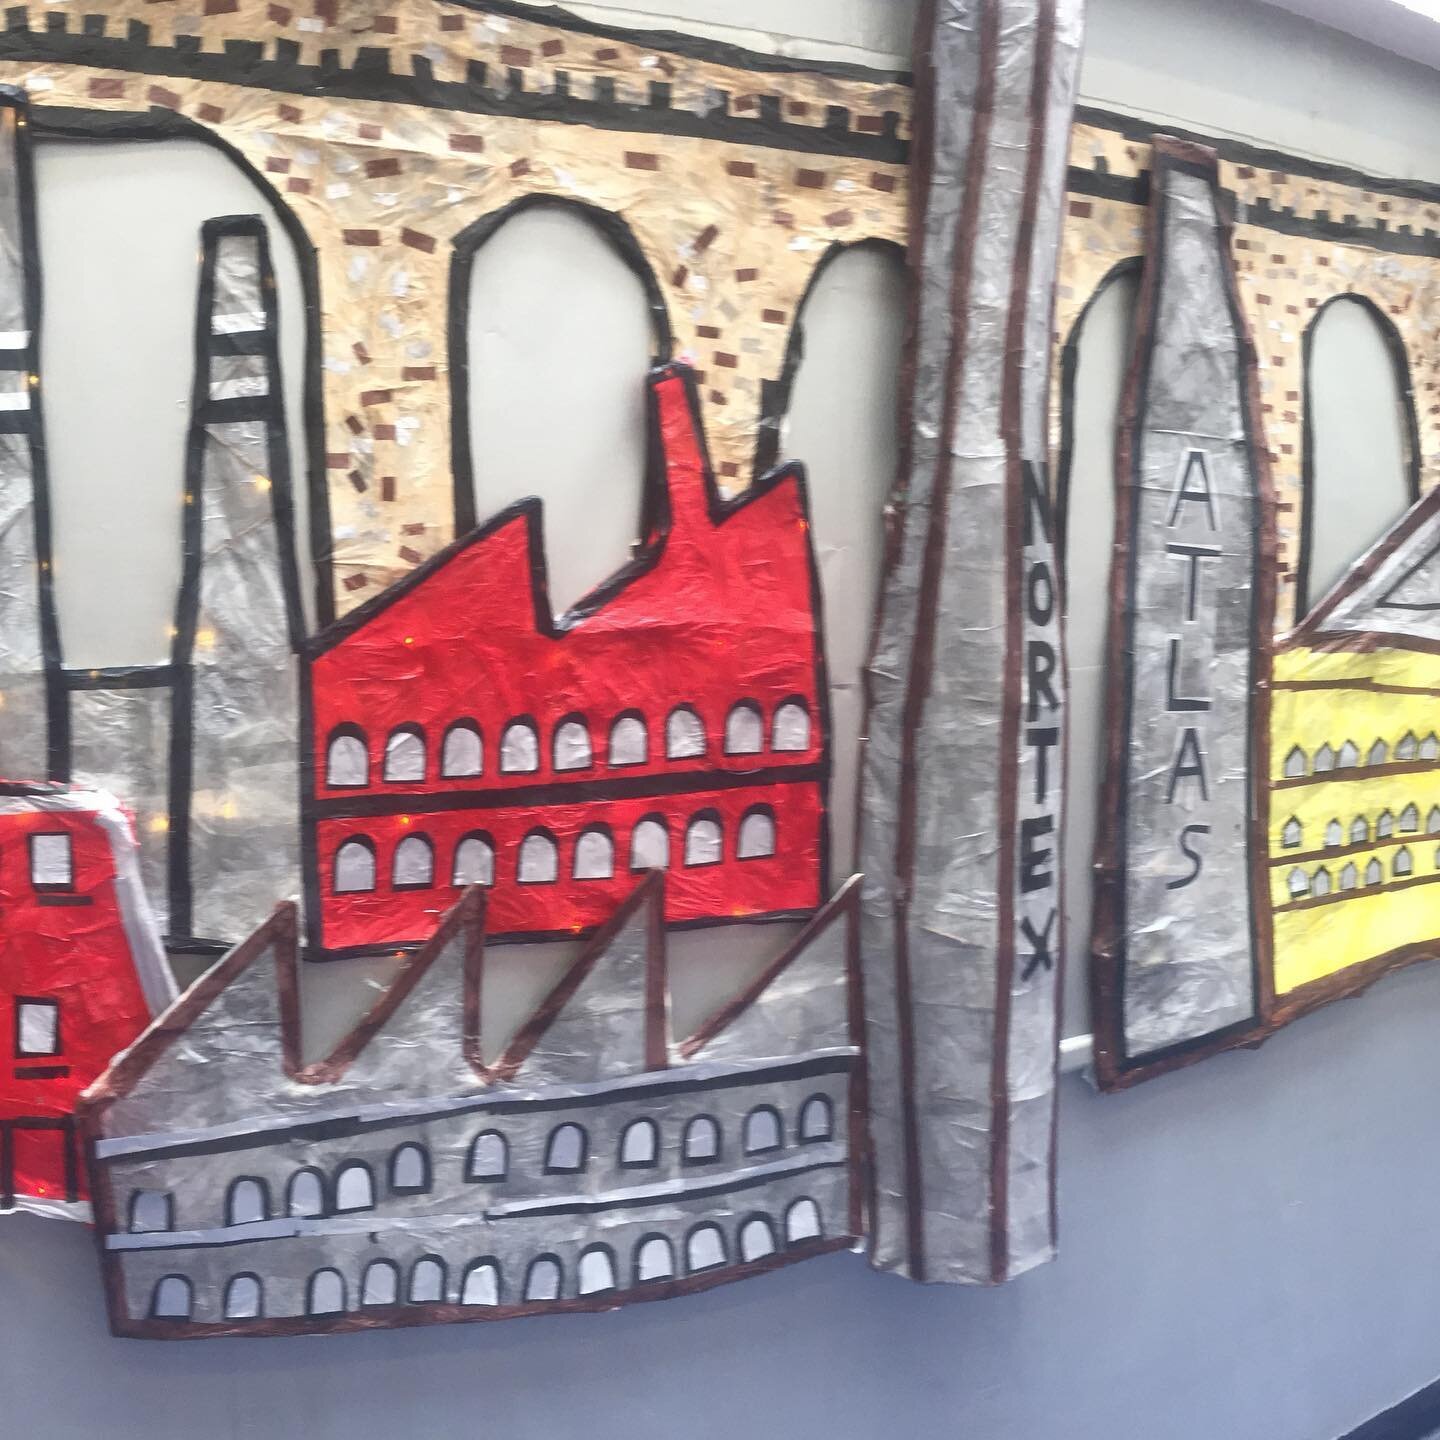 Lowry inspired industrial landscape built with Oxford Grove Primary in Bolton #bolton #schoolartworkshop #artworkshop #schoolart #artistsinschools #sculptureworkshop #schooldisplay #lowry #tslowryinspired